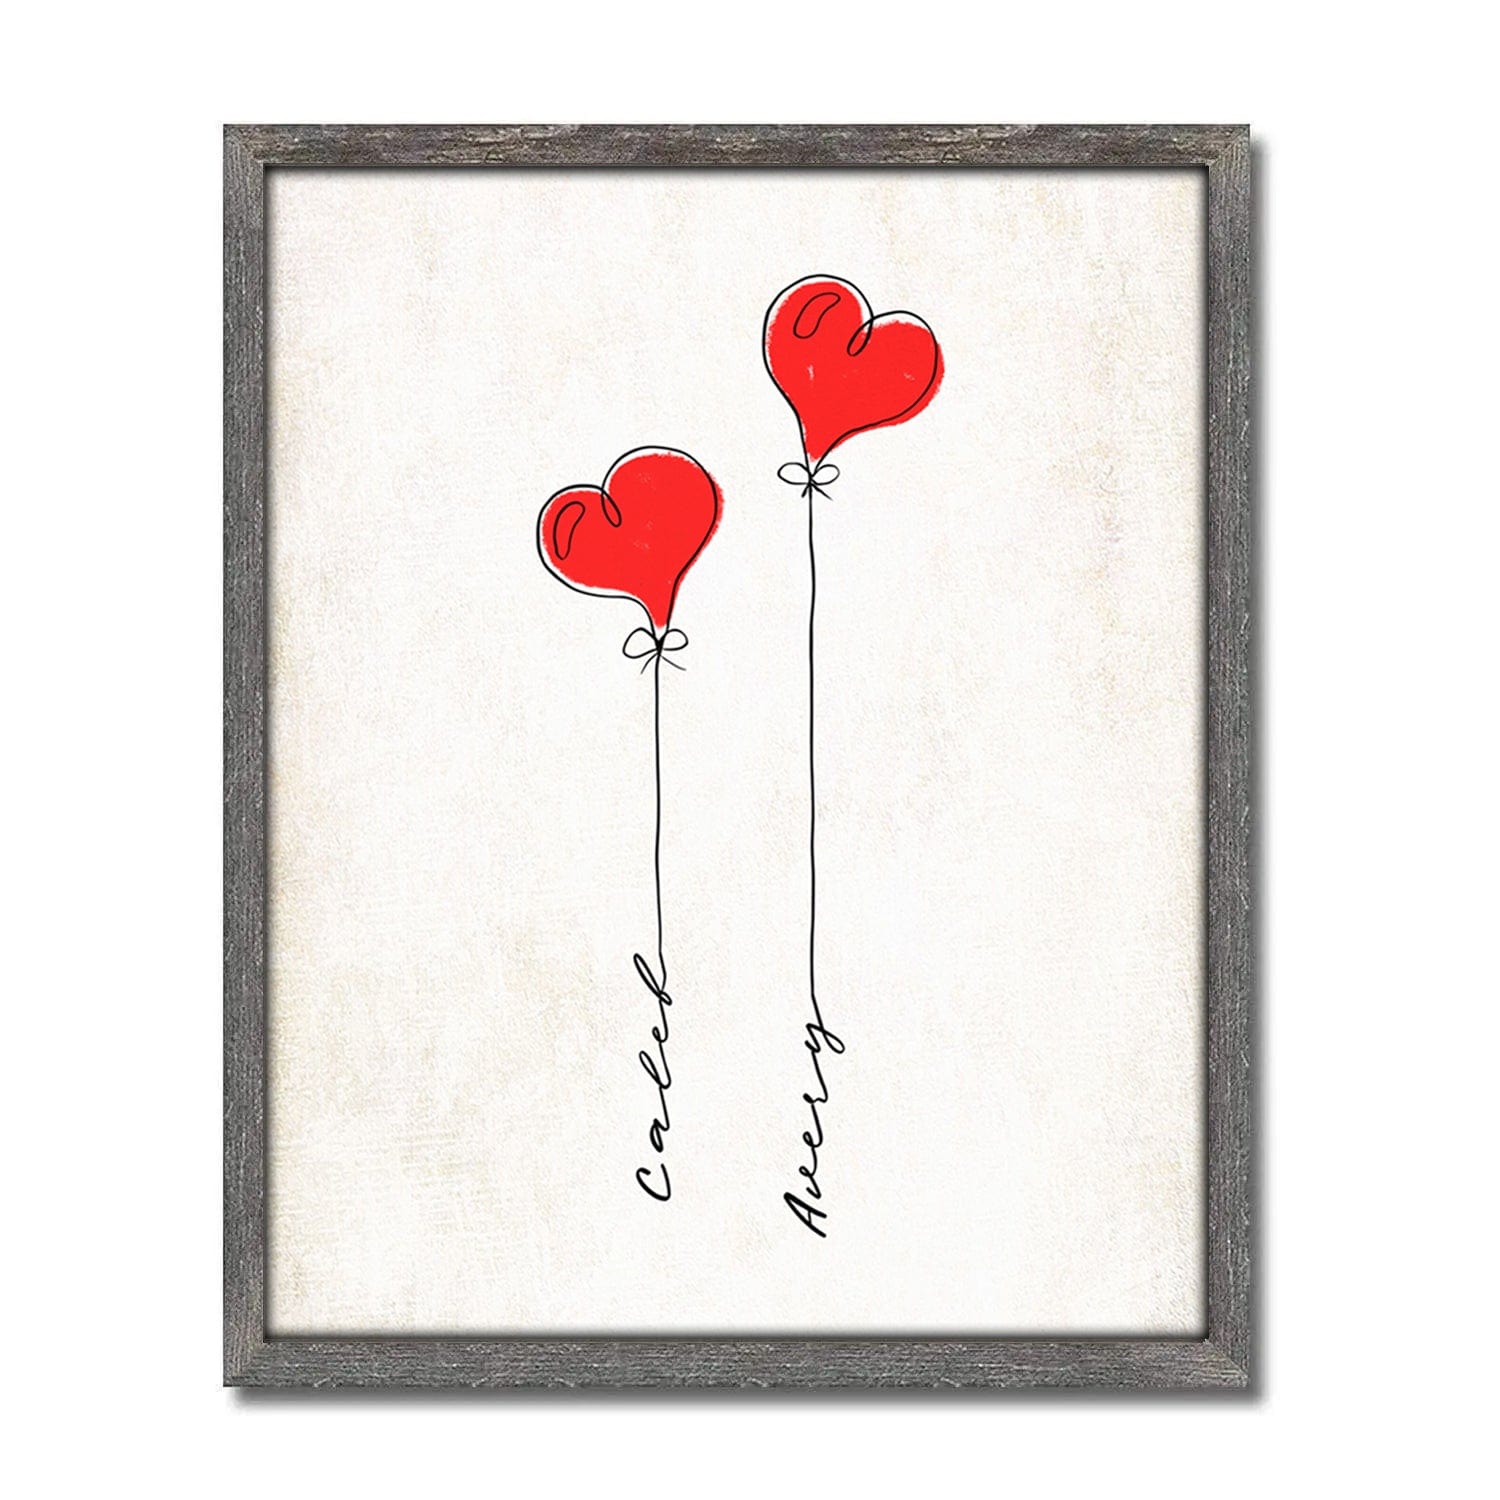 Personalized Heart Balloons Print - Framed Canvas